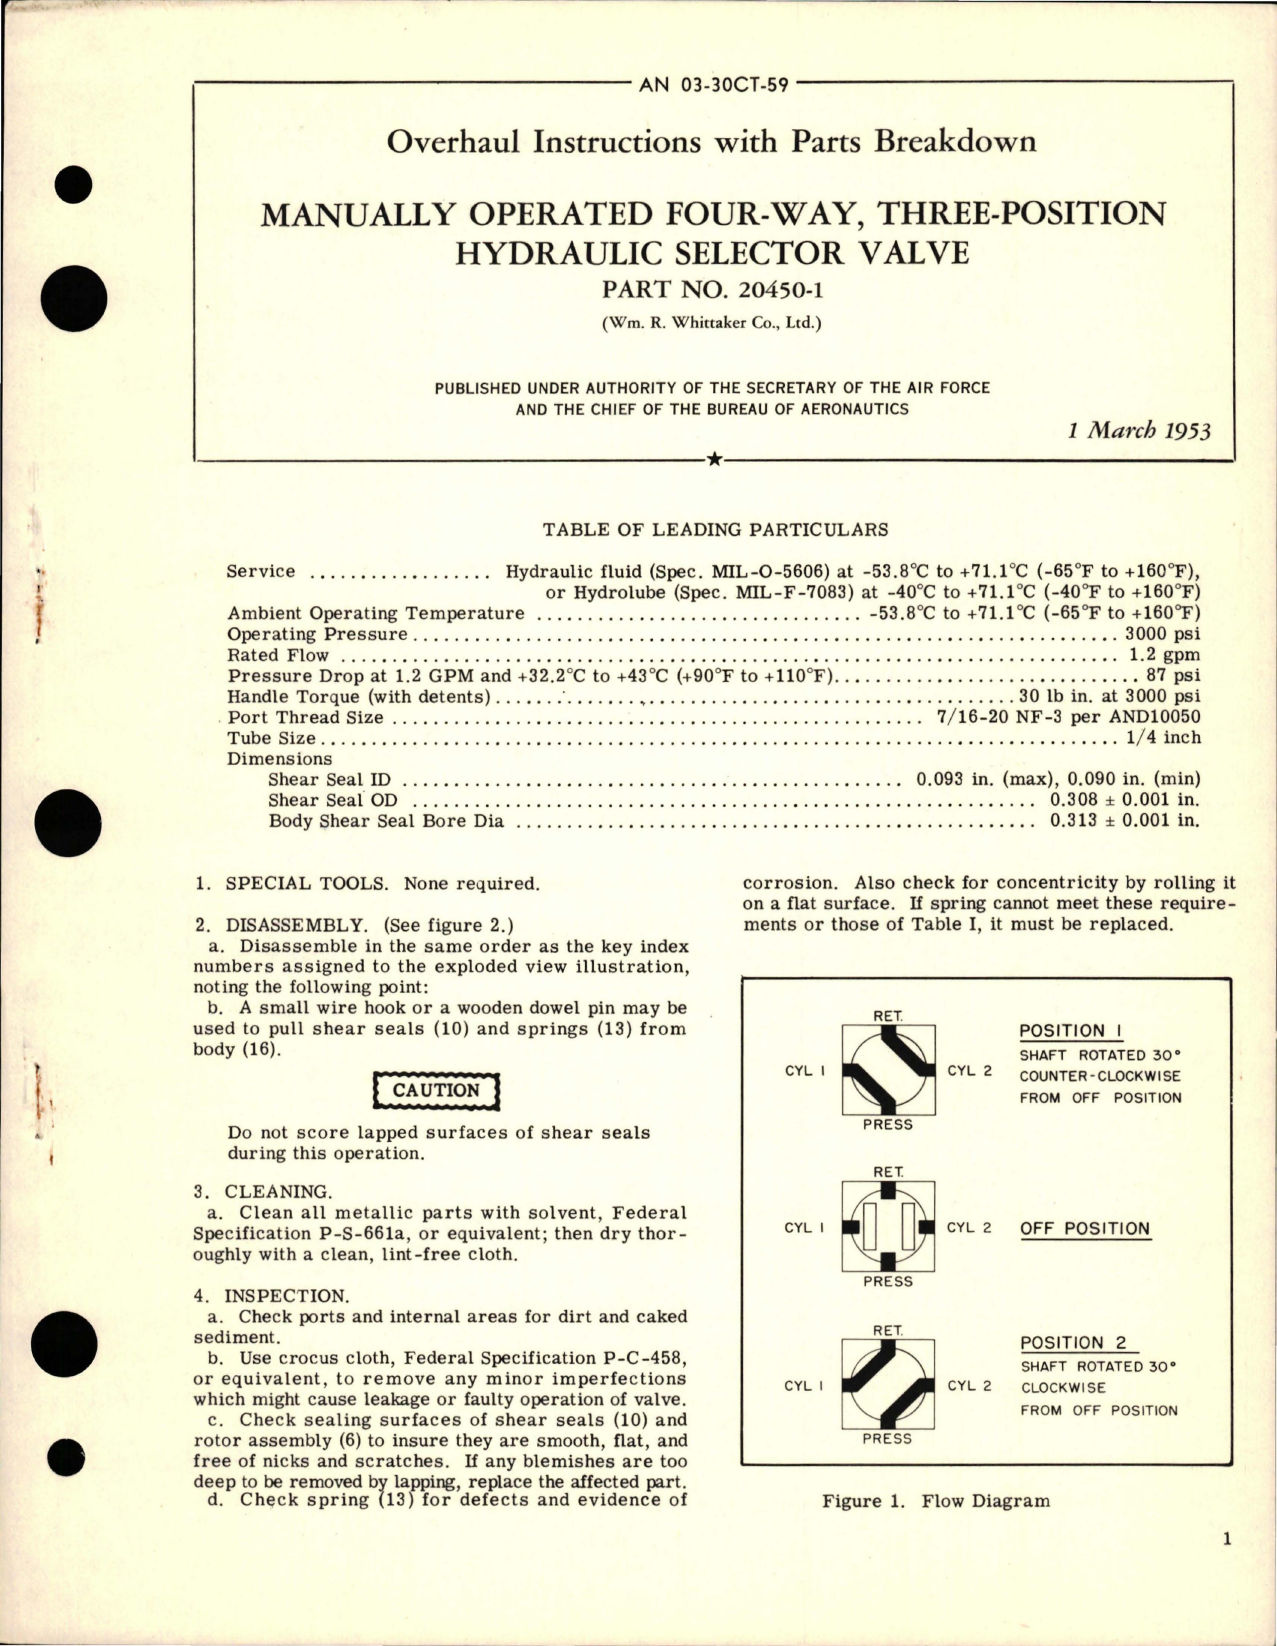 Sample page 1 from AirCorps Library document: Overhaul Instructions with Parts for Manually Operated Four Way Three Position Hydraulic Selector Valve - Part 20450-1